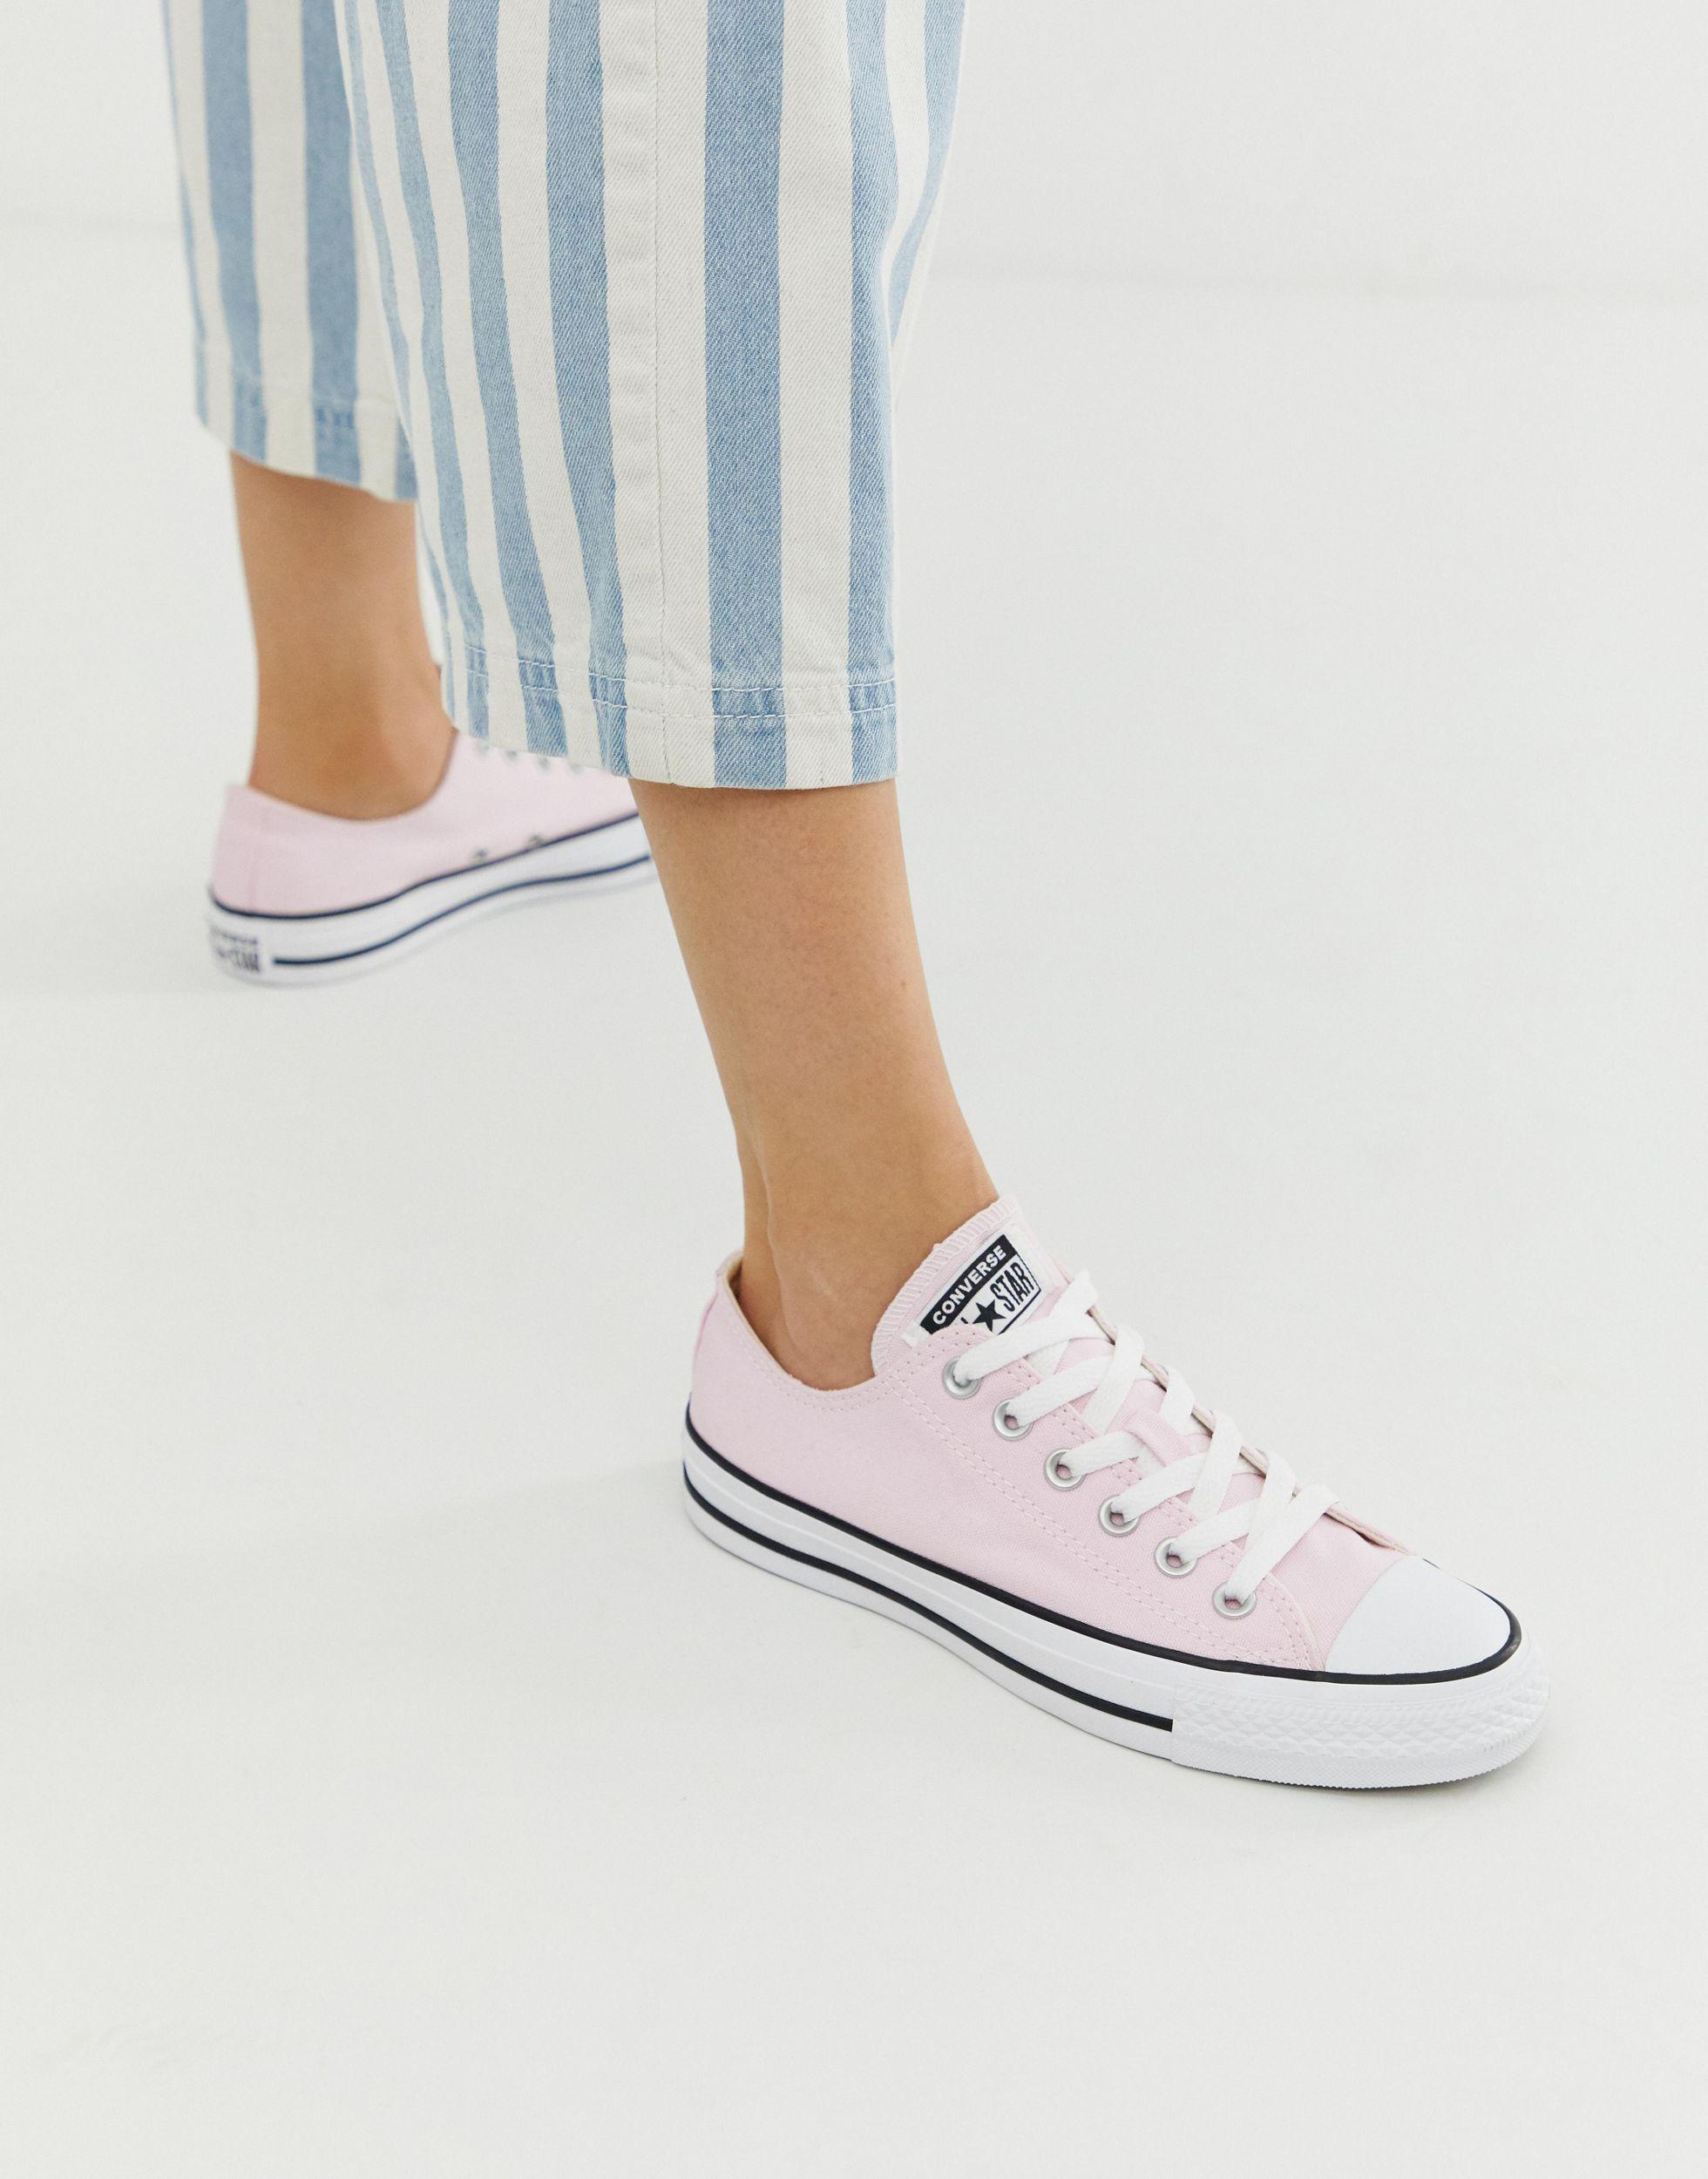 Converse Chuck Taylor All Star Lift Ox Trainers in Pink | Lyst